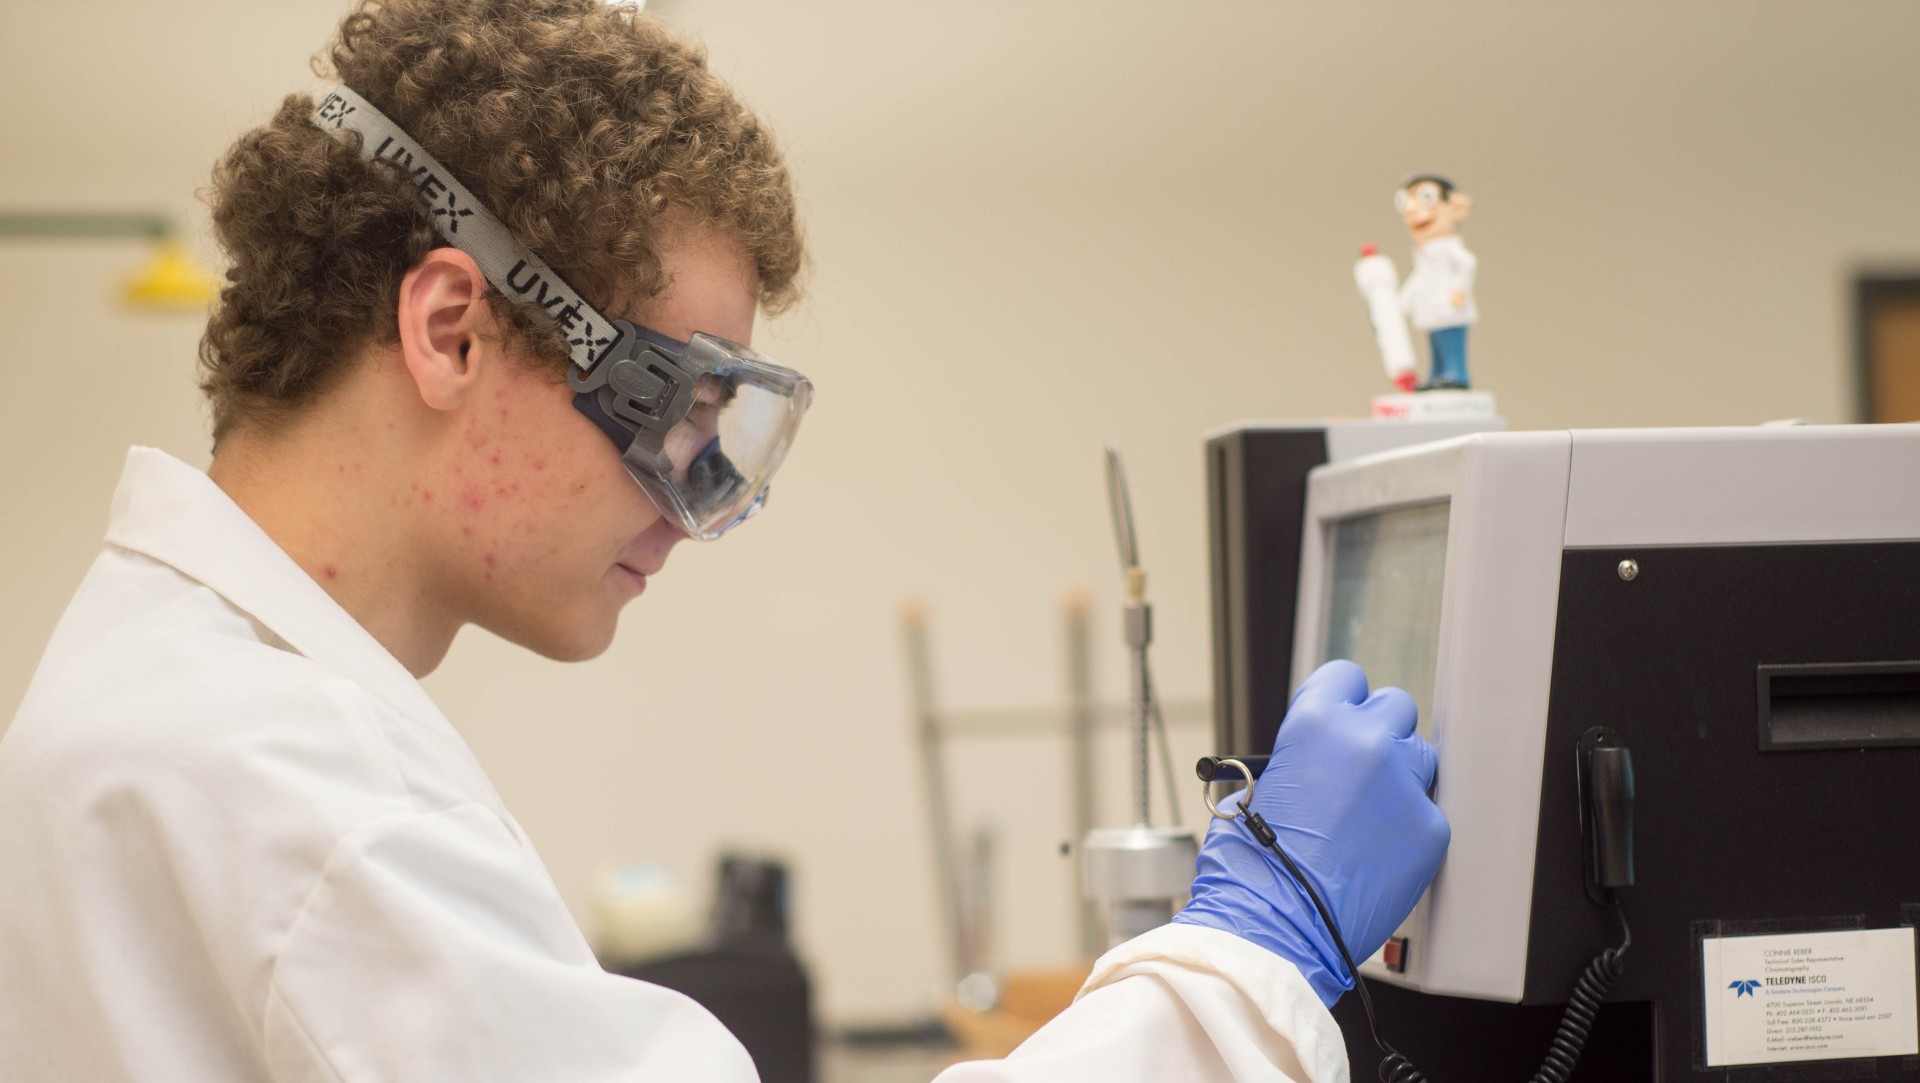 A student uses the automated flash chromatophraphy system in a chemistry lab during summer research.